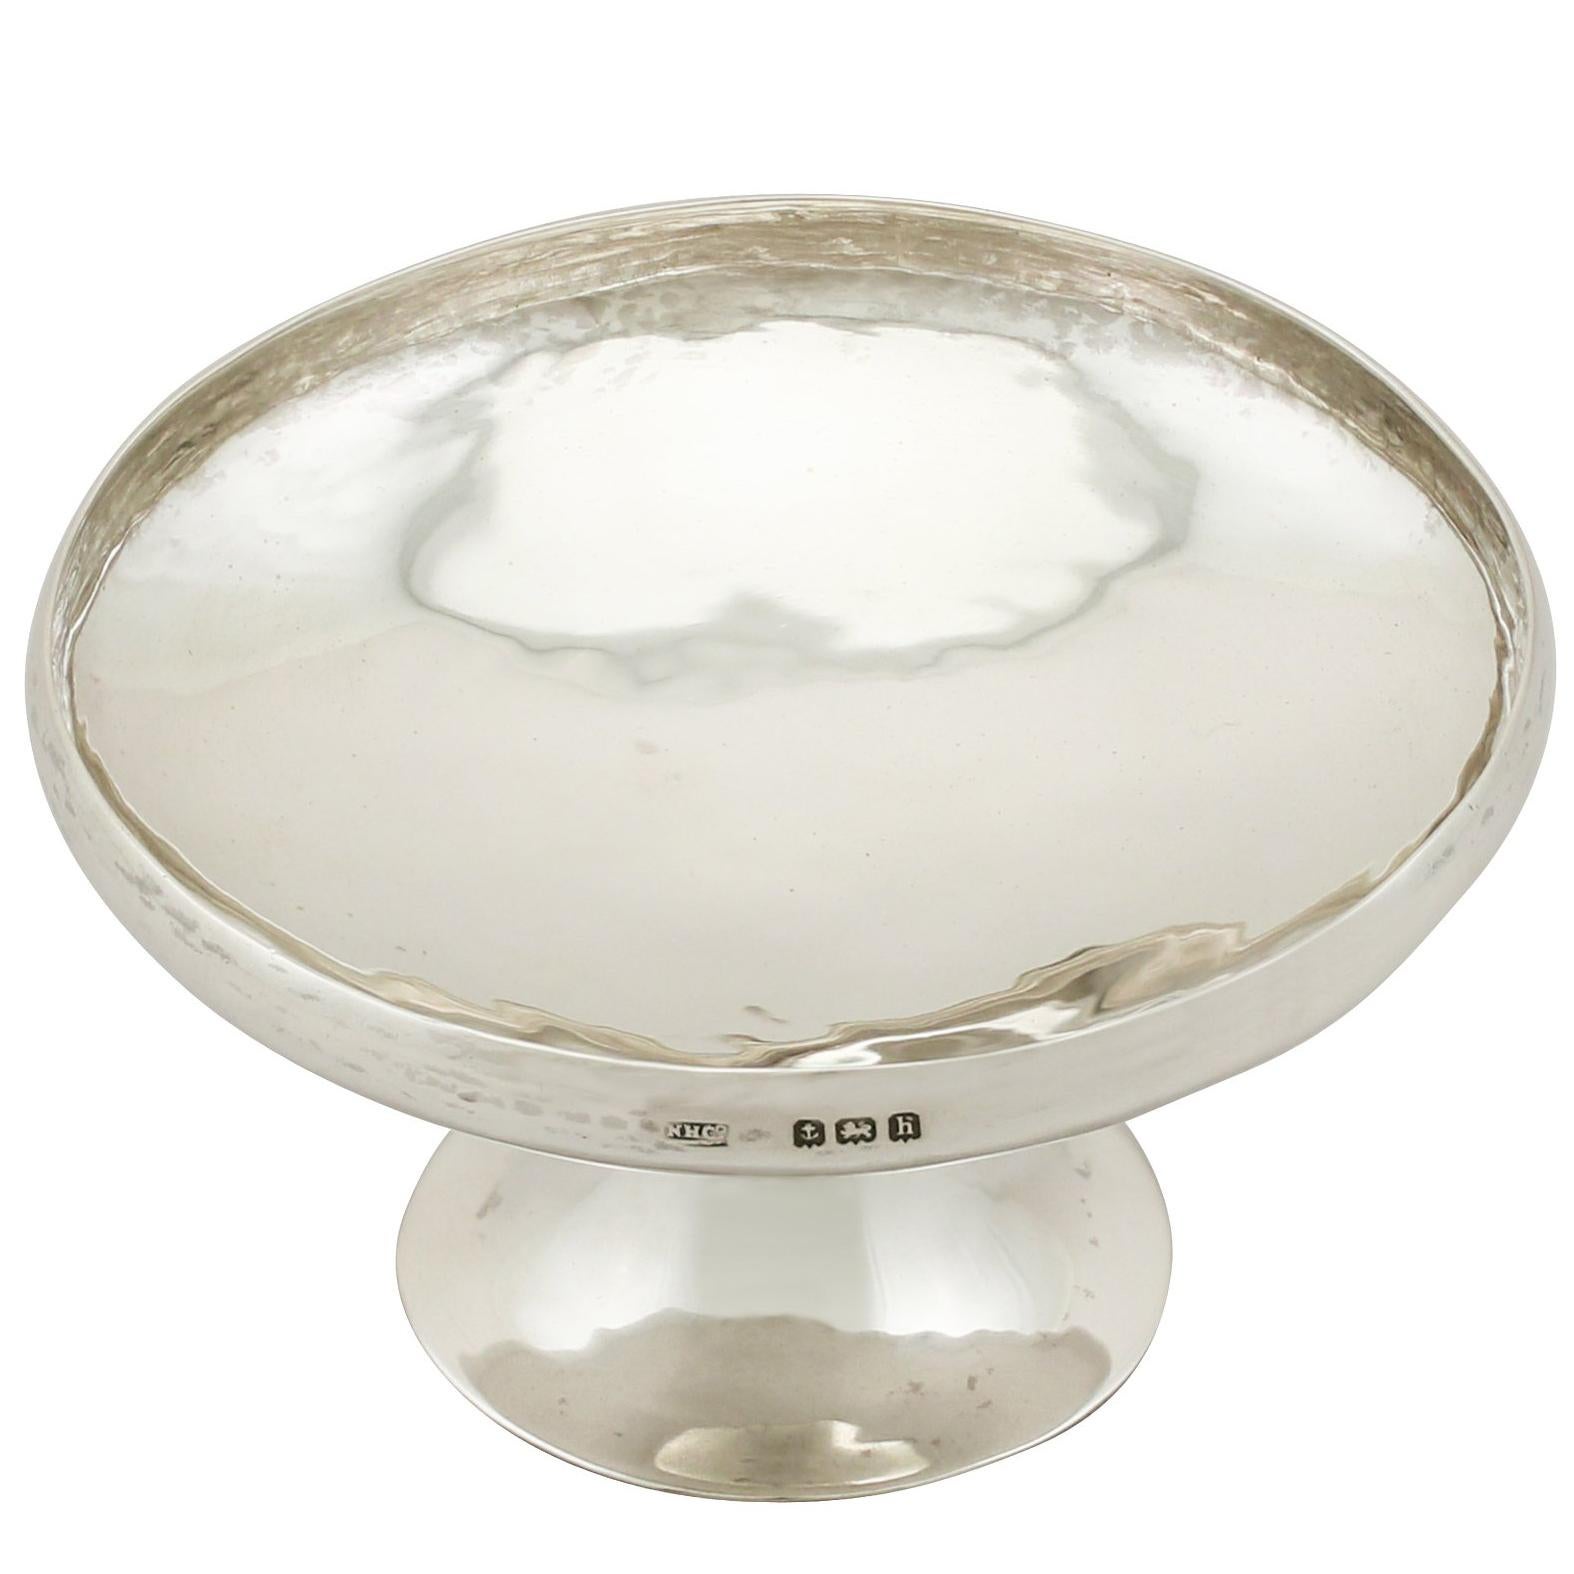 An exceptional, fine and impressive antique Edwardian English sterling silver bon bon dish made by Newcastle Handicrafts Co; an addition to our silver dining collection.

This exceptional antique Edwardian silver bon bon dish, in sterling